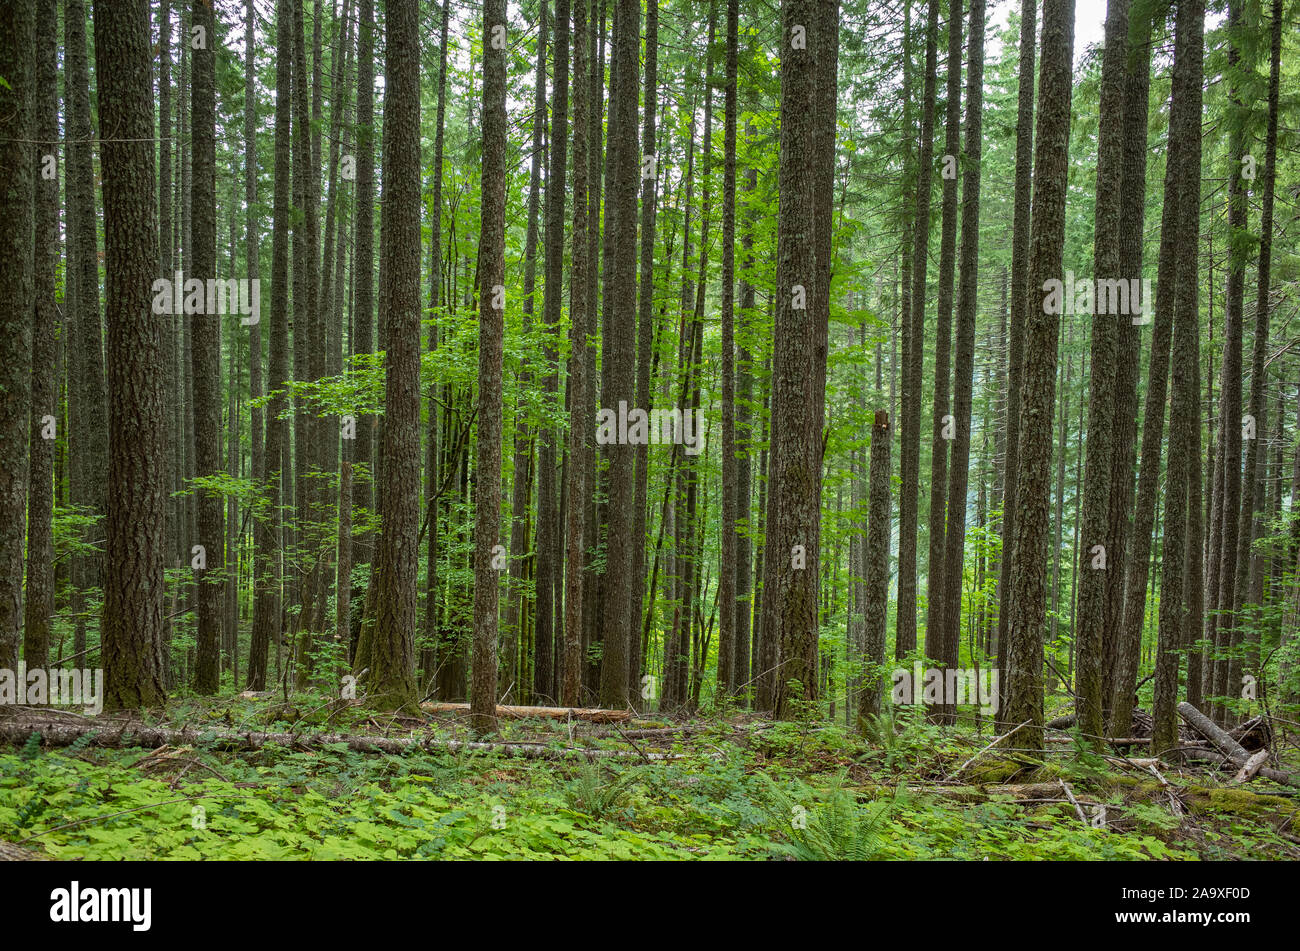 Lush forest in the central Cascades, Gifford Pinchot National Forest, Washington Stock Photo